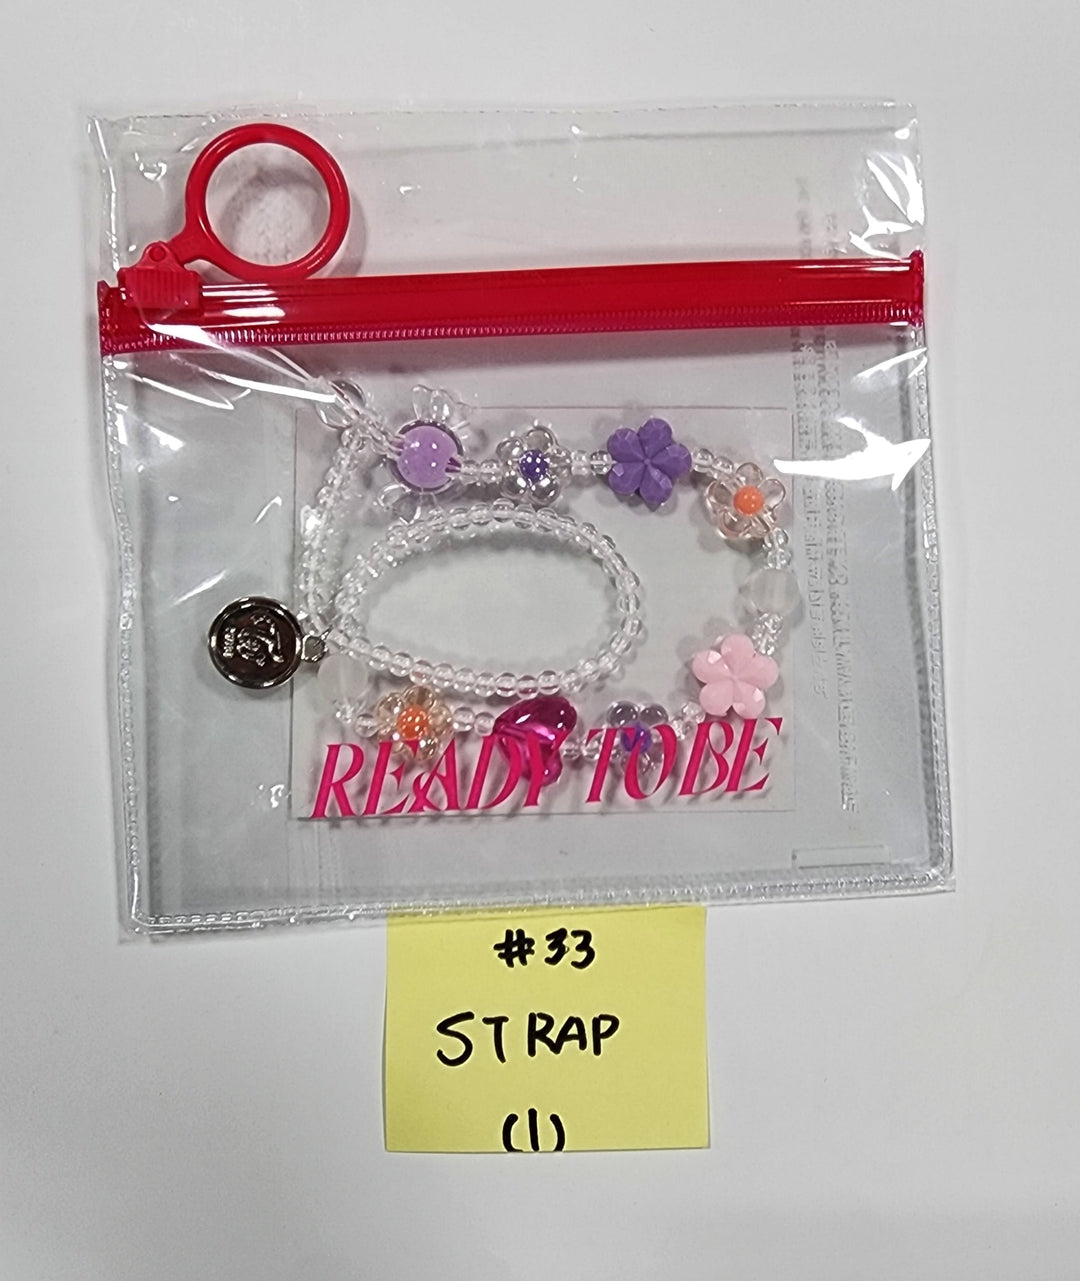 Twice 5th "World Tour Ready To Be" - Official MD [Episode Photobook, Trading Card, Masking Tape, ID Set, Collect Book, Acrylic Kit, Frame Keyring, Sticker Pack, Camera, T-shirt, Candybong Beads Strap, Badge, Candybong Lovely Cape] [Restocked 6/19]